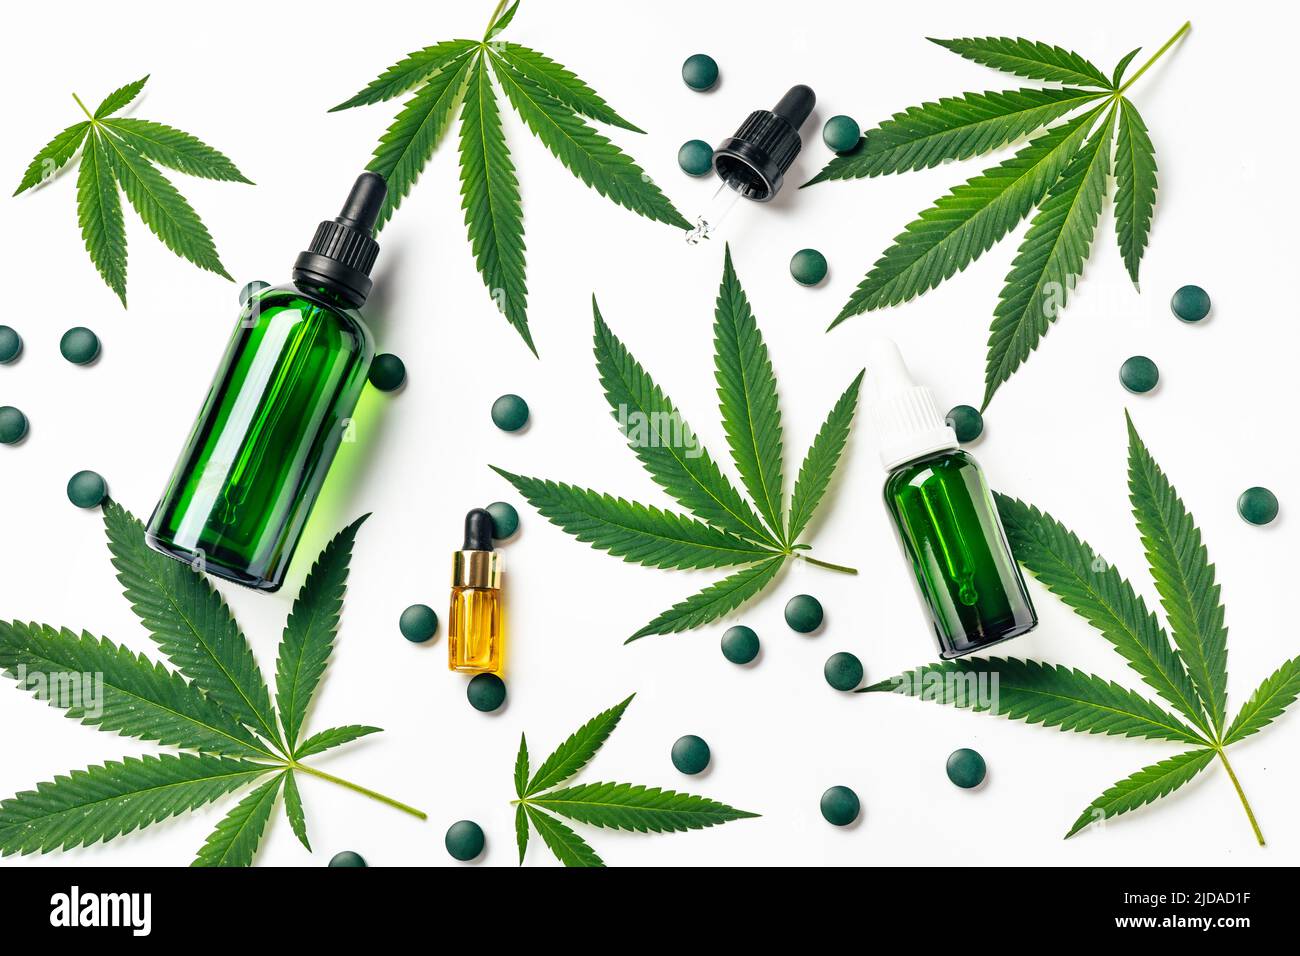 Top view of green hemp leaves with cosmetics glass reusable bottles. Medical and Recreational Use of Marijuana. Natural cosmetics or superfood Stock Photo